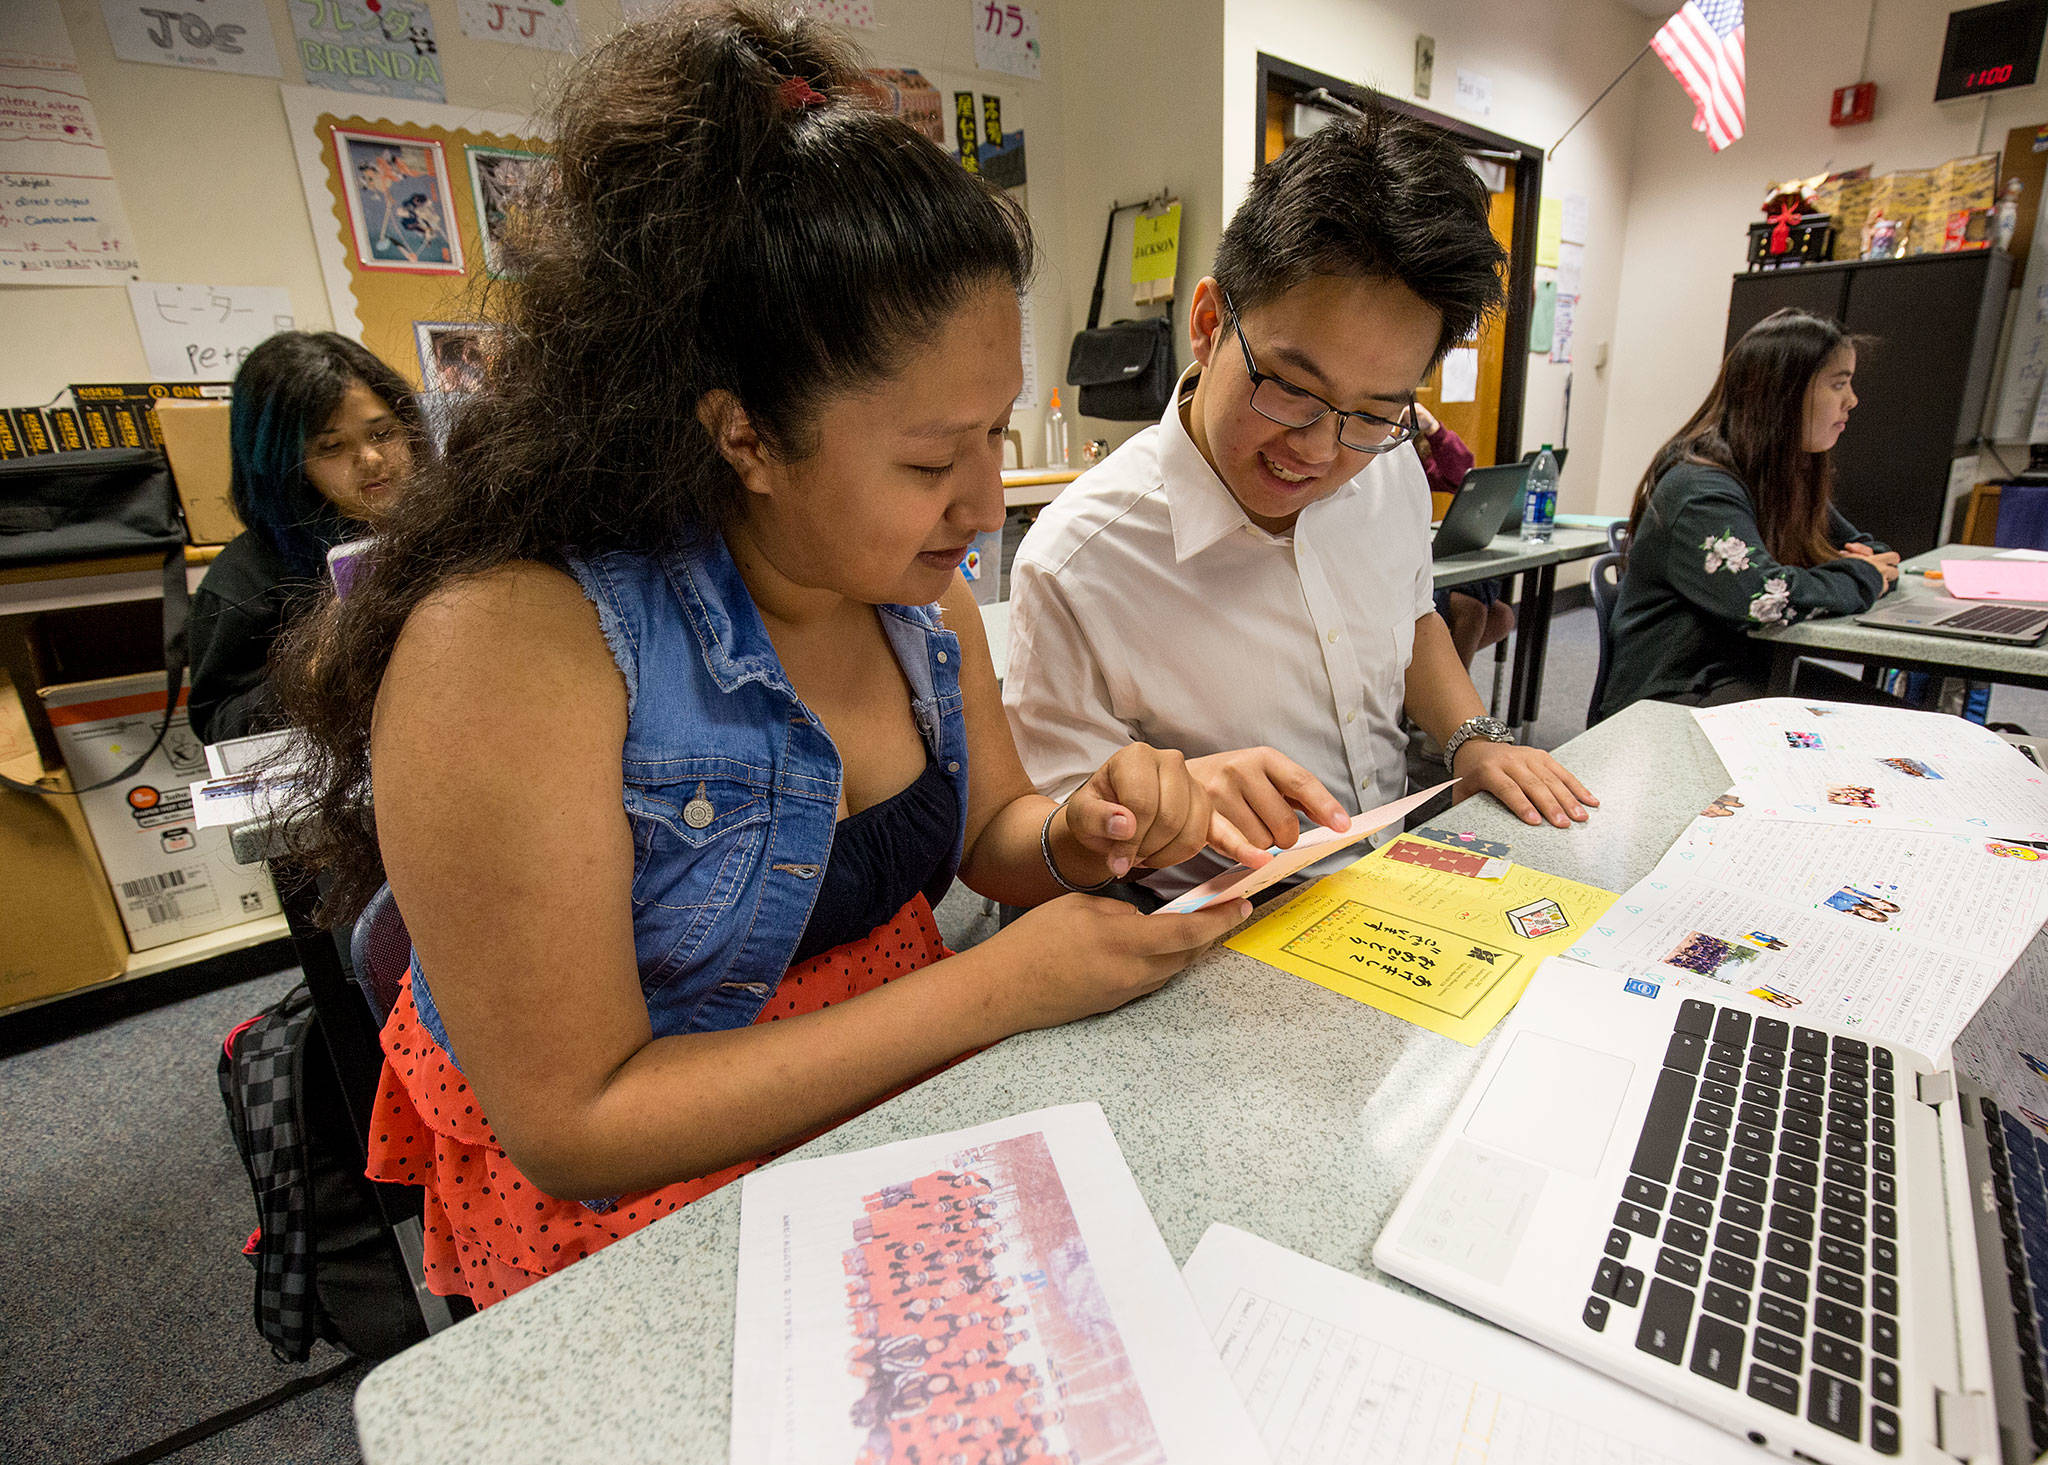 Mariner High School students April Hernandez-Diaz and Brian Pham work through a translation of a card by their pen pals from Japan. Mariner joined the pen pal project 10 years ago with Itoshima High School in Fukuoka, Japan. (Andy Bronson / The Herald)